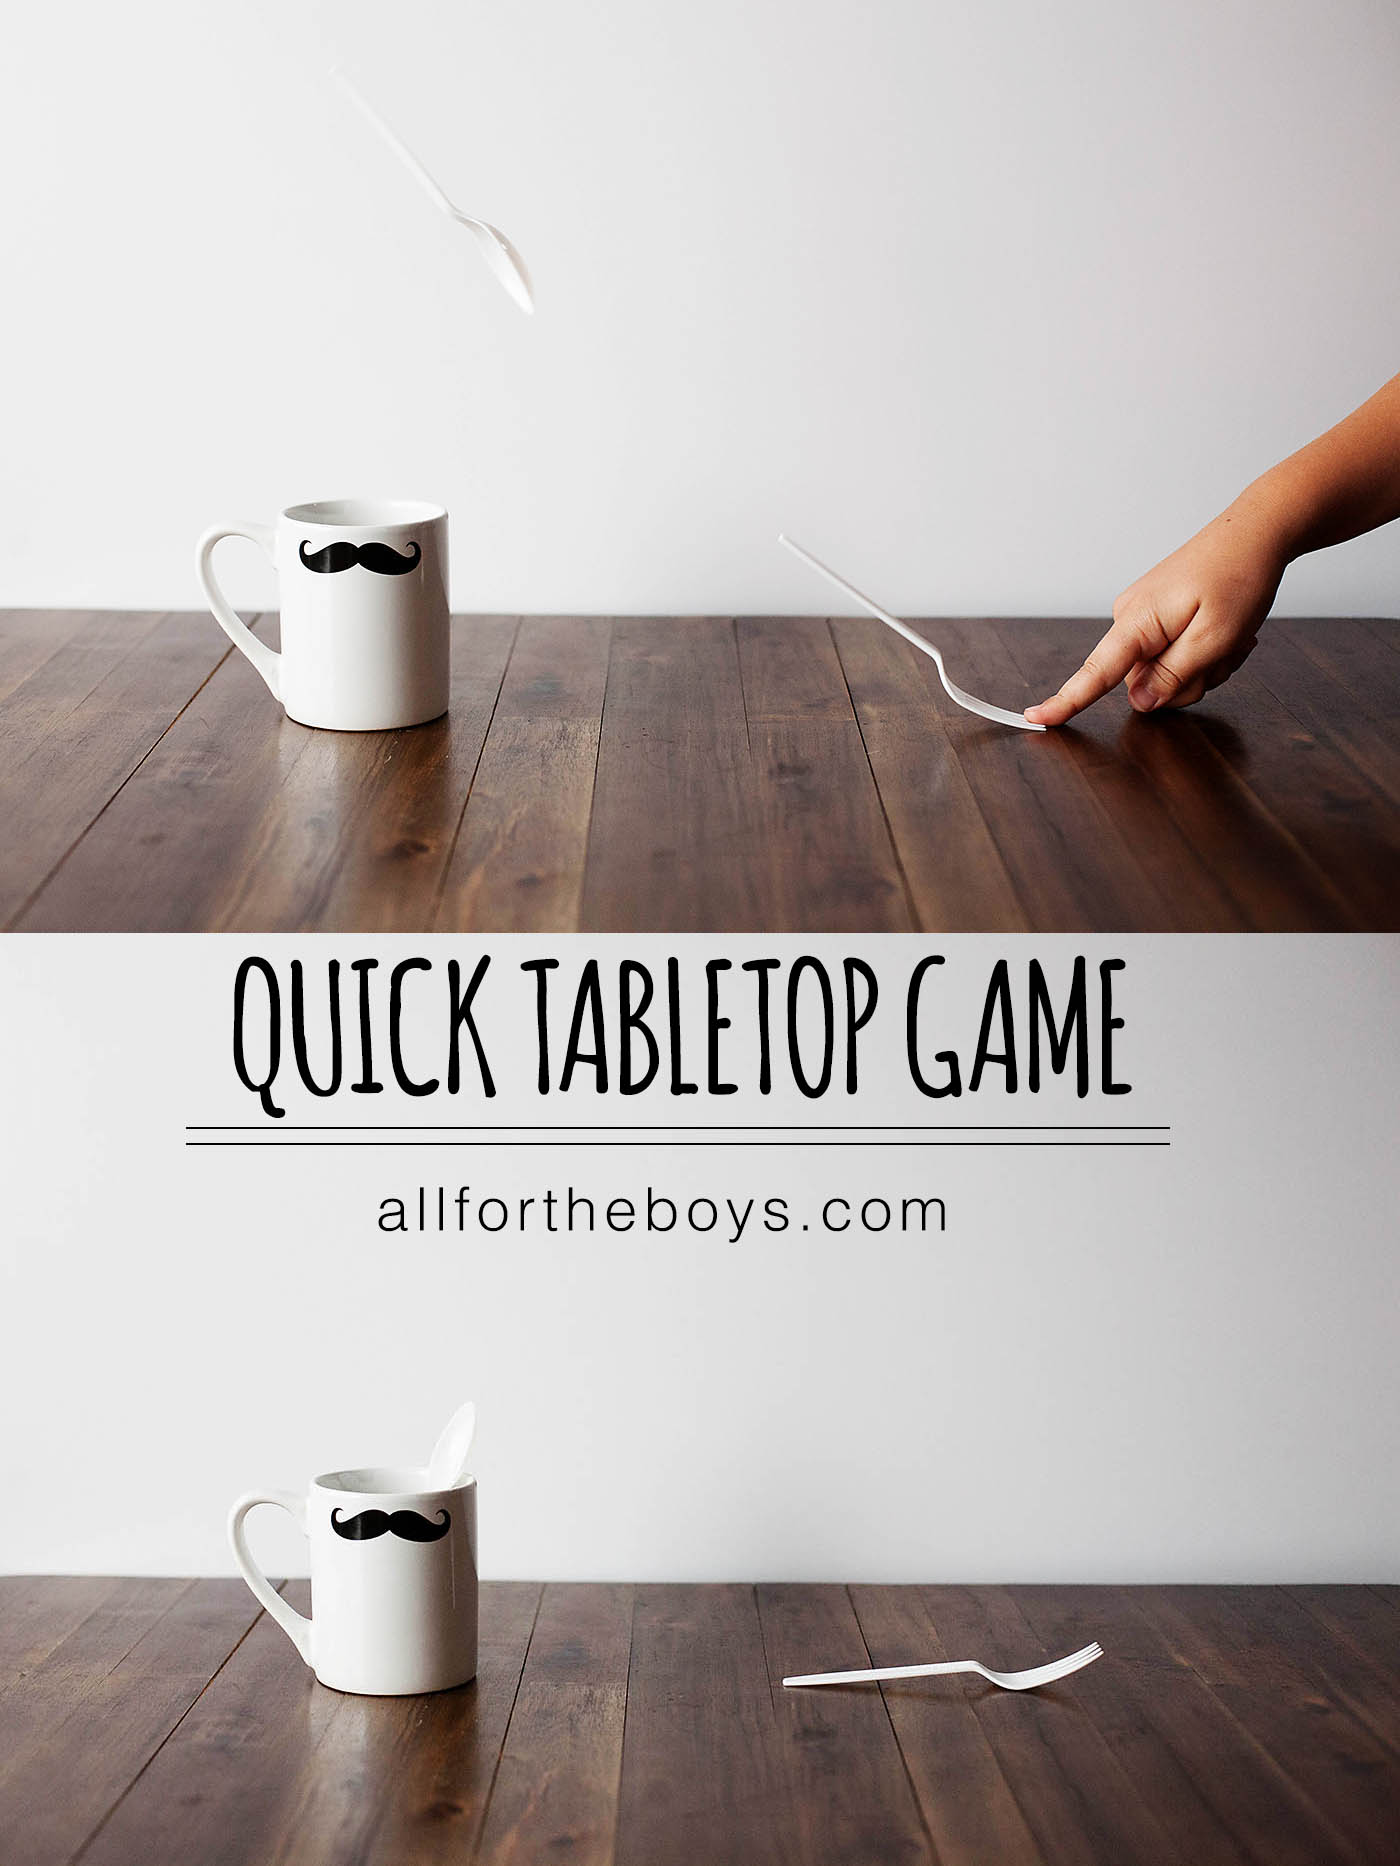 Quick Tabletop Game